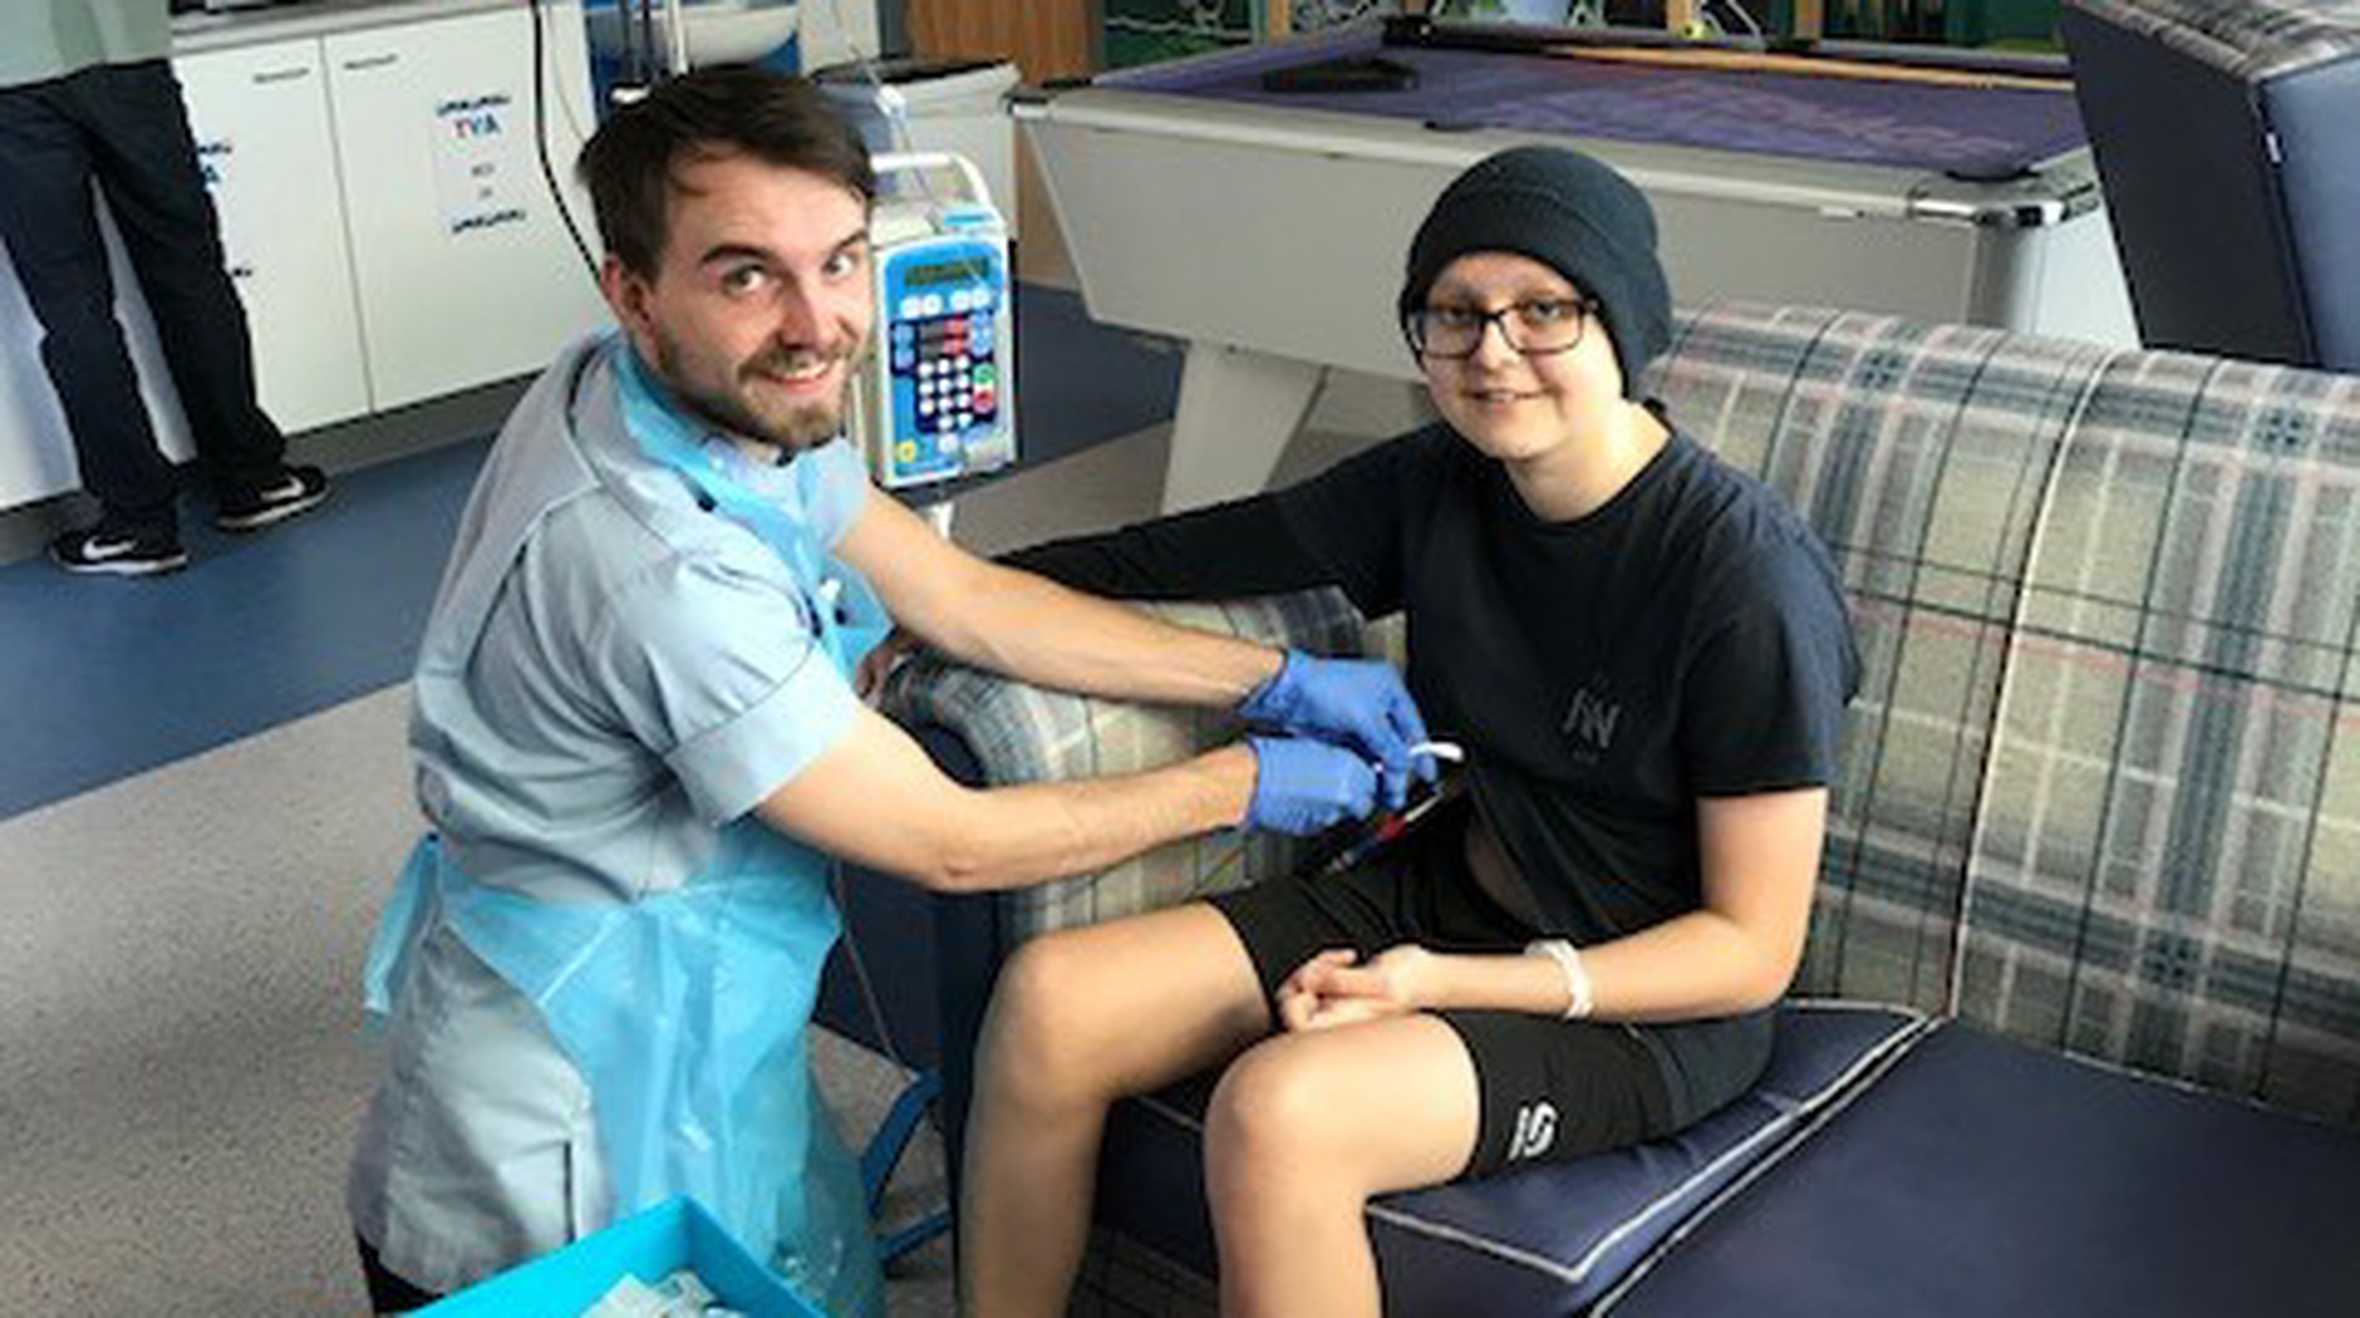 Jack with a nurse in hospital